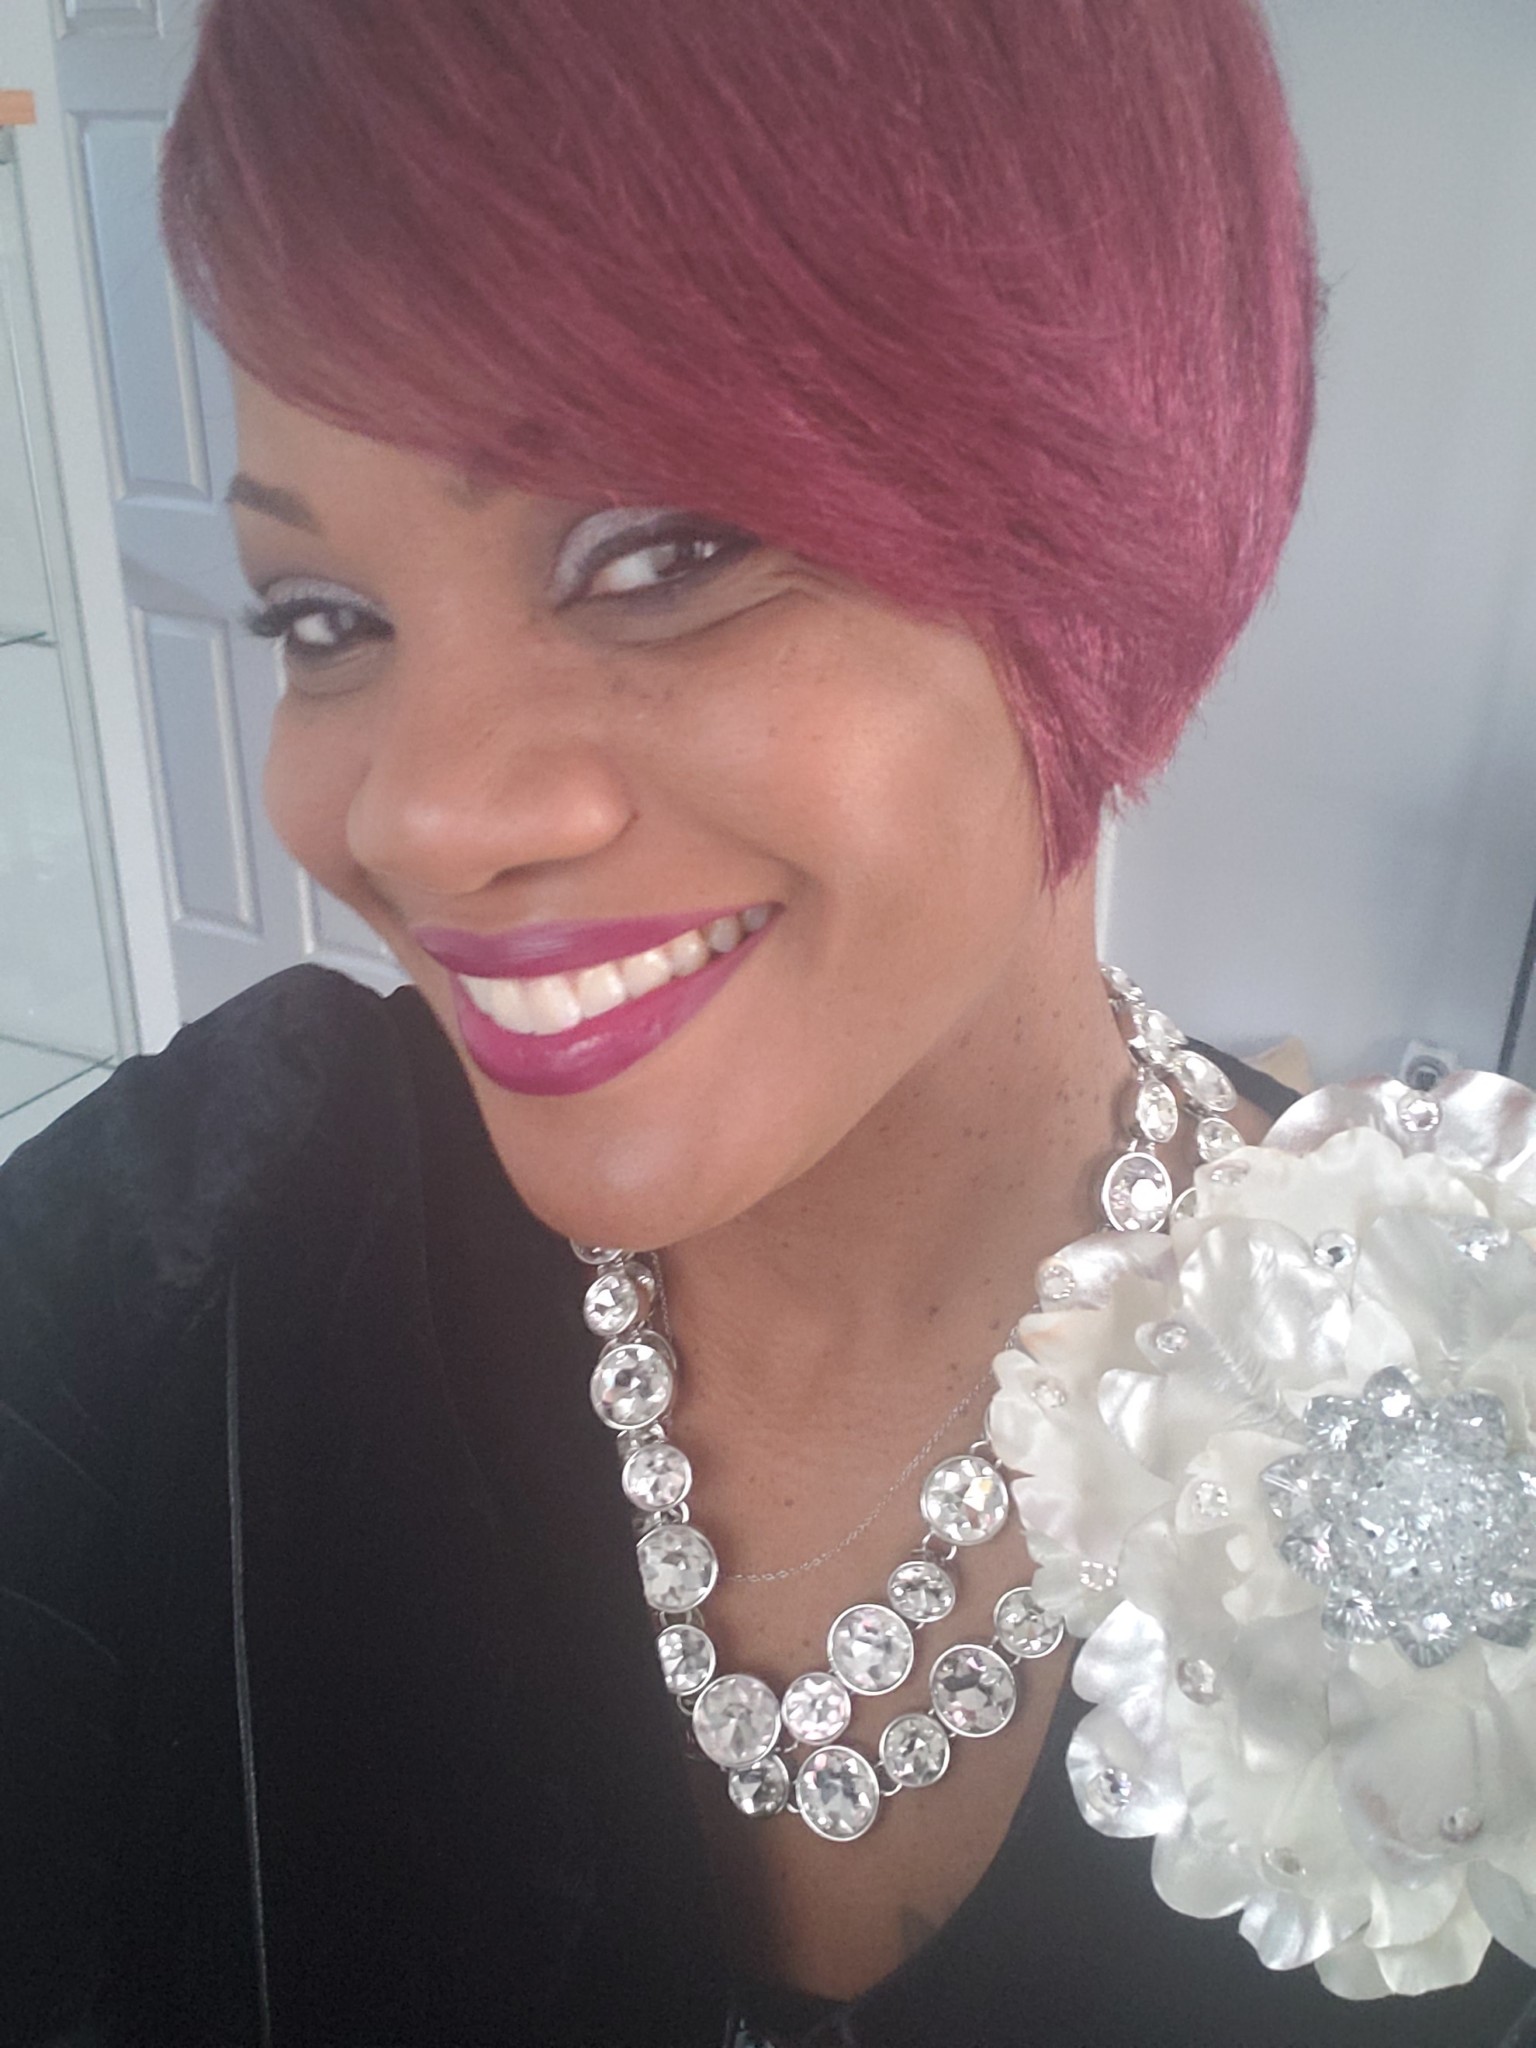 Ashro Woman of the Week Karen a smiling African-American woman wearing a black blouse with a white flower, a necklace, and has red hair.